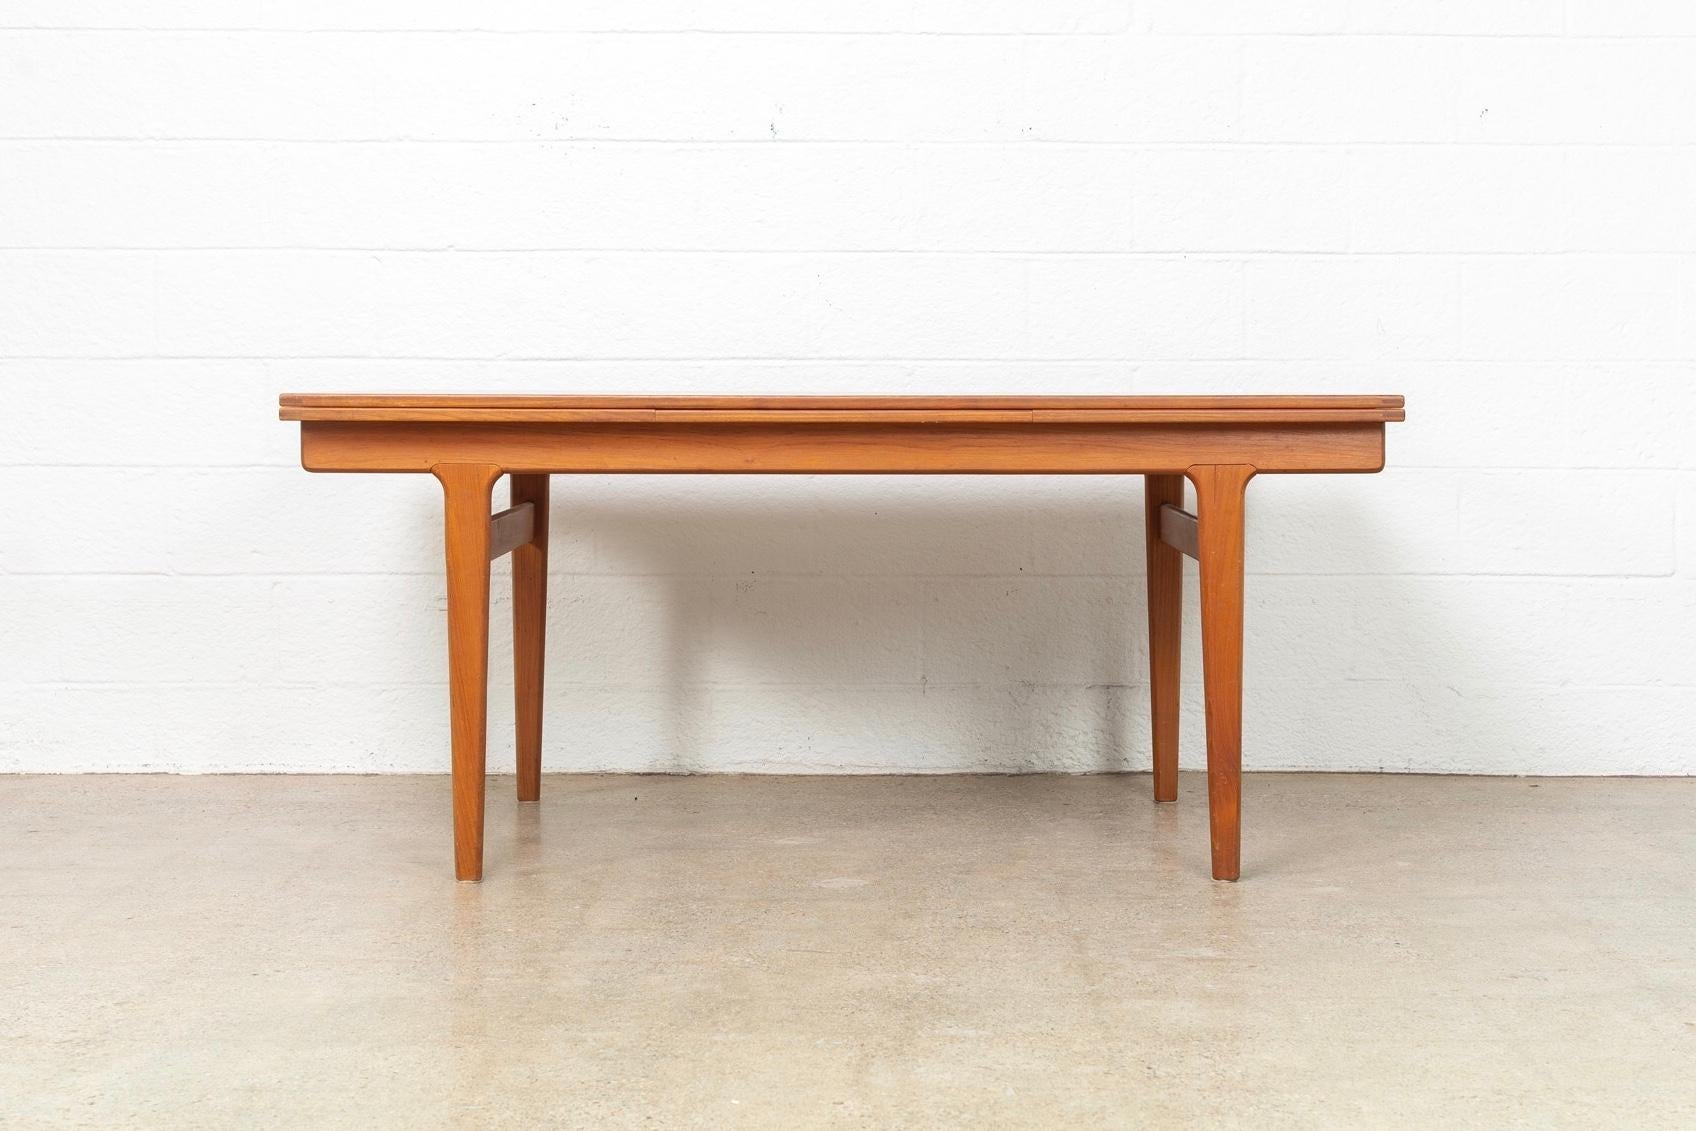 This vintage Mid-Century Modern Henning Kjaernulf for Vejle Moebelfabrik expandable dining table made in Denmark circa 1960 has an elegant Minimalist aesthetic and a clean, unimposing Danish modern design. It is exceptionally crafted from solid teak